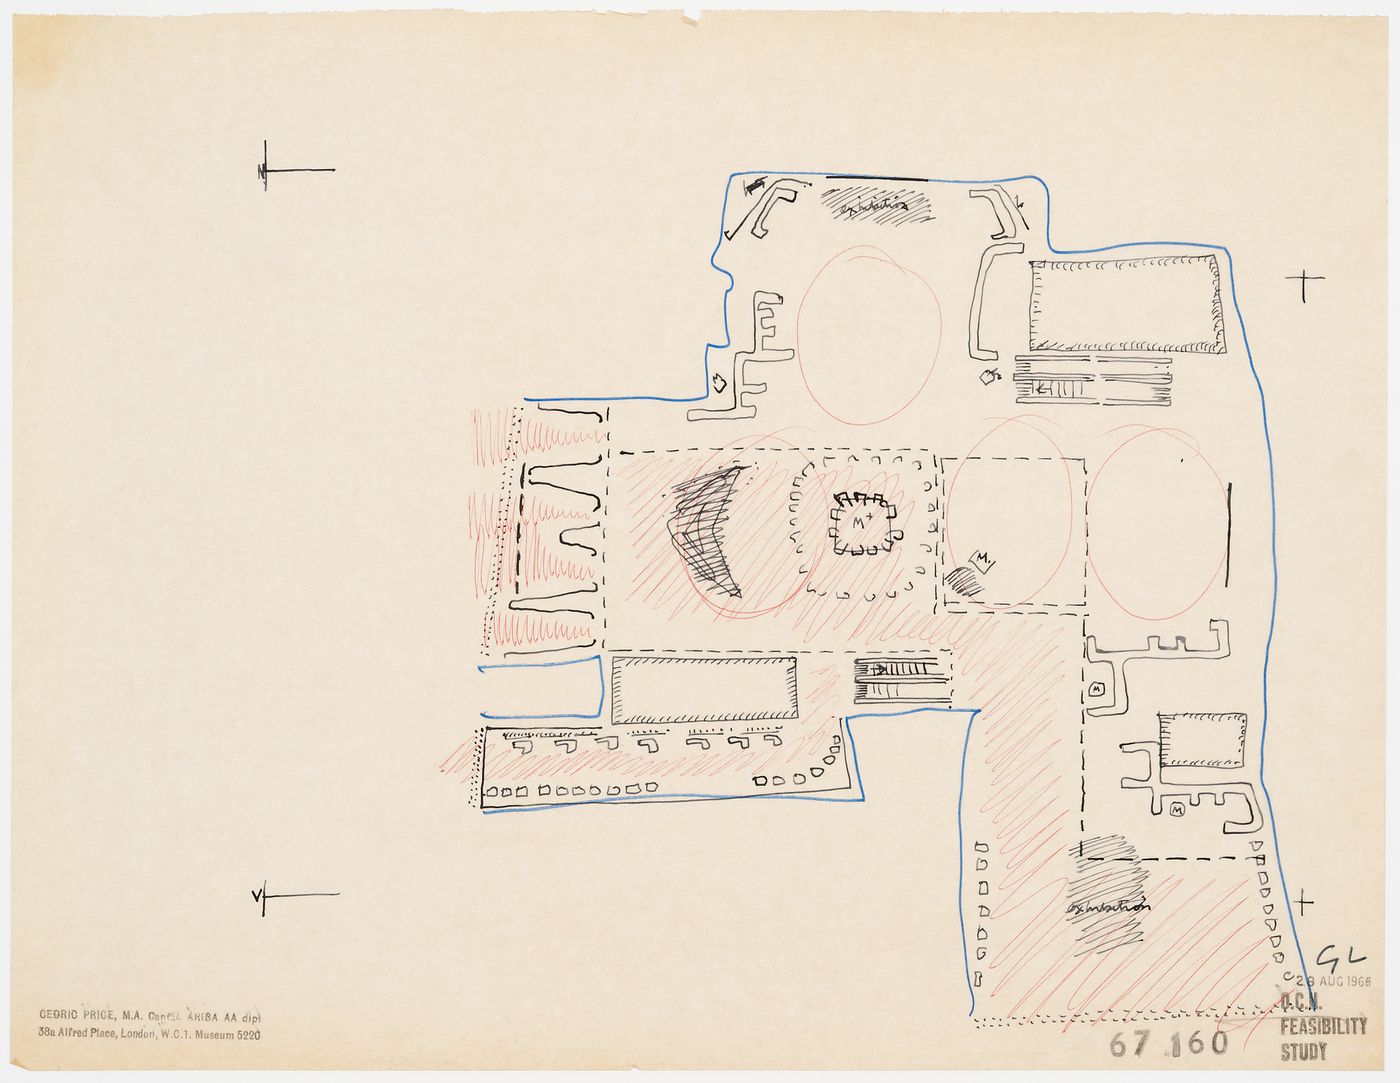 Conceptual plan for ground level of Oxford Corner House, London, England